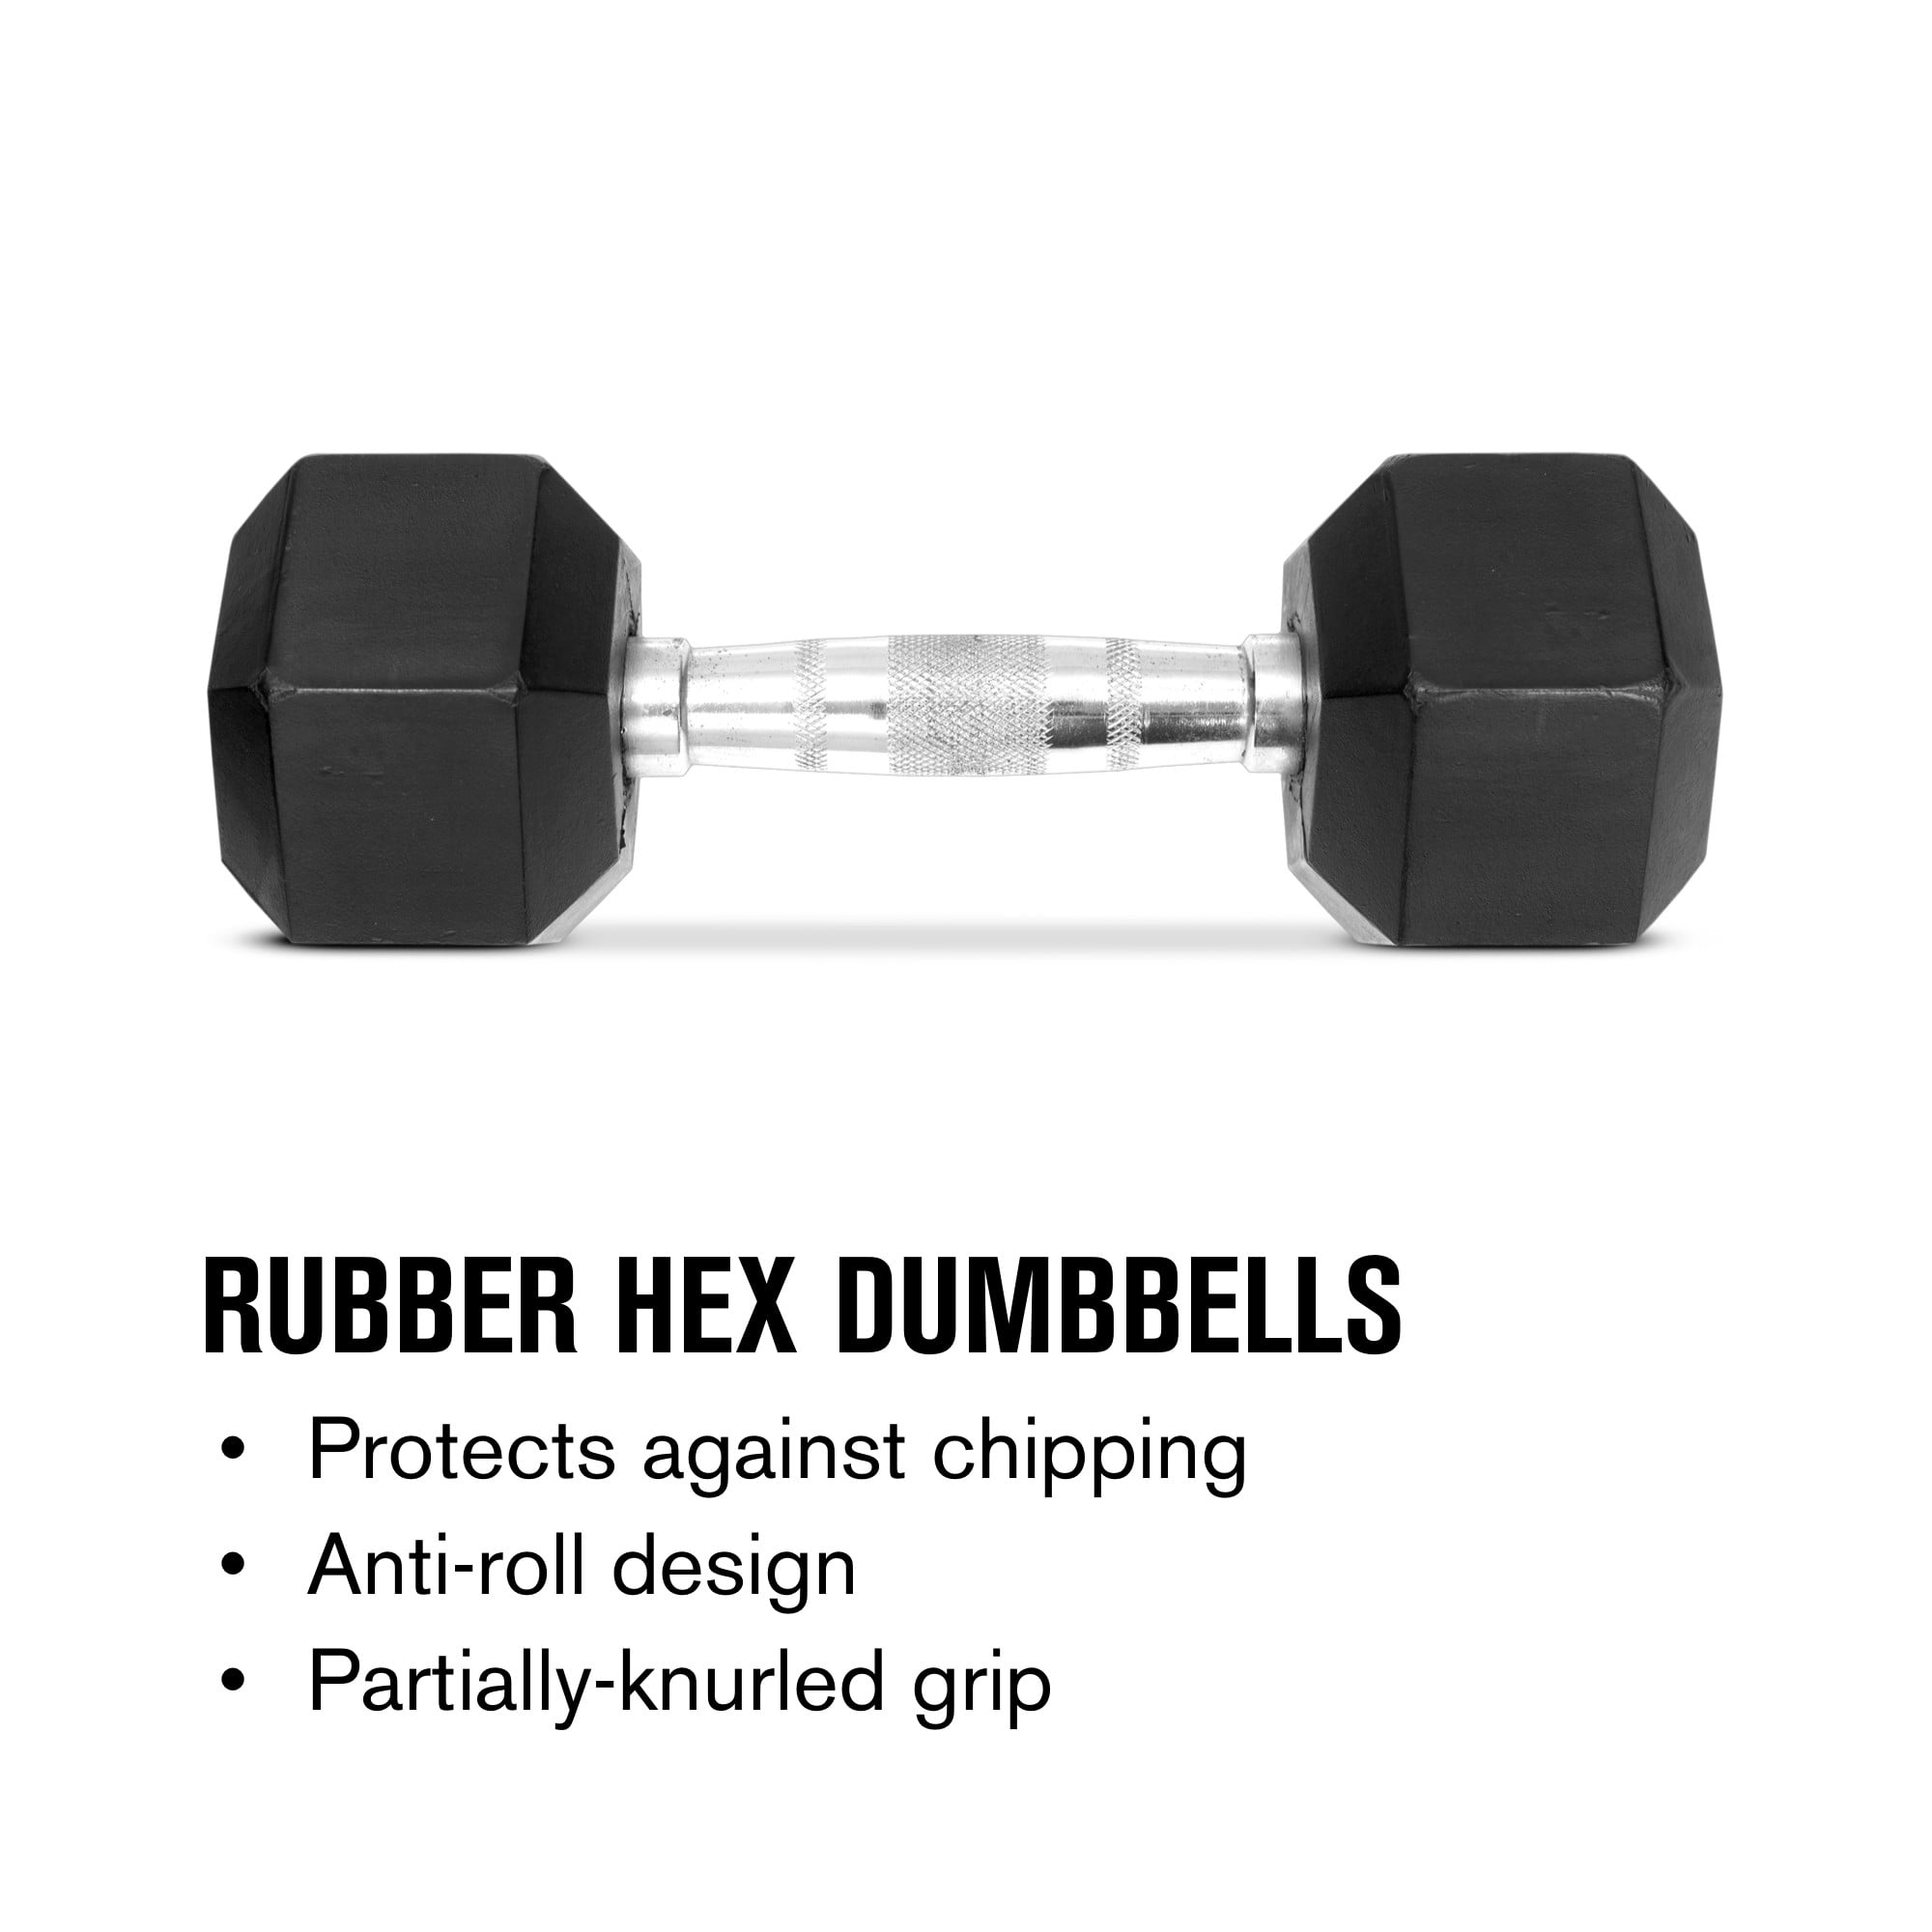 Weider DRH30 Rubber Hex Dumbbell with Knurled Grip 30lbs for sale online 